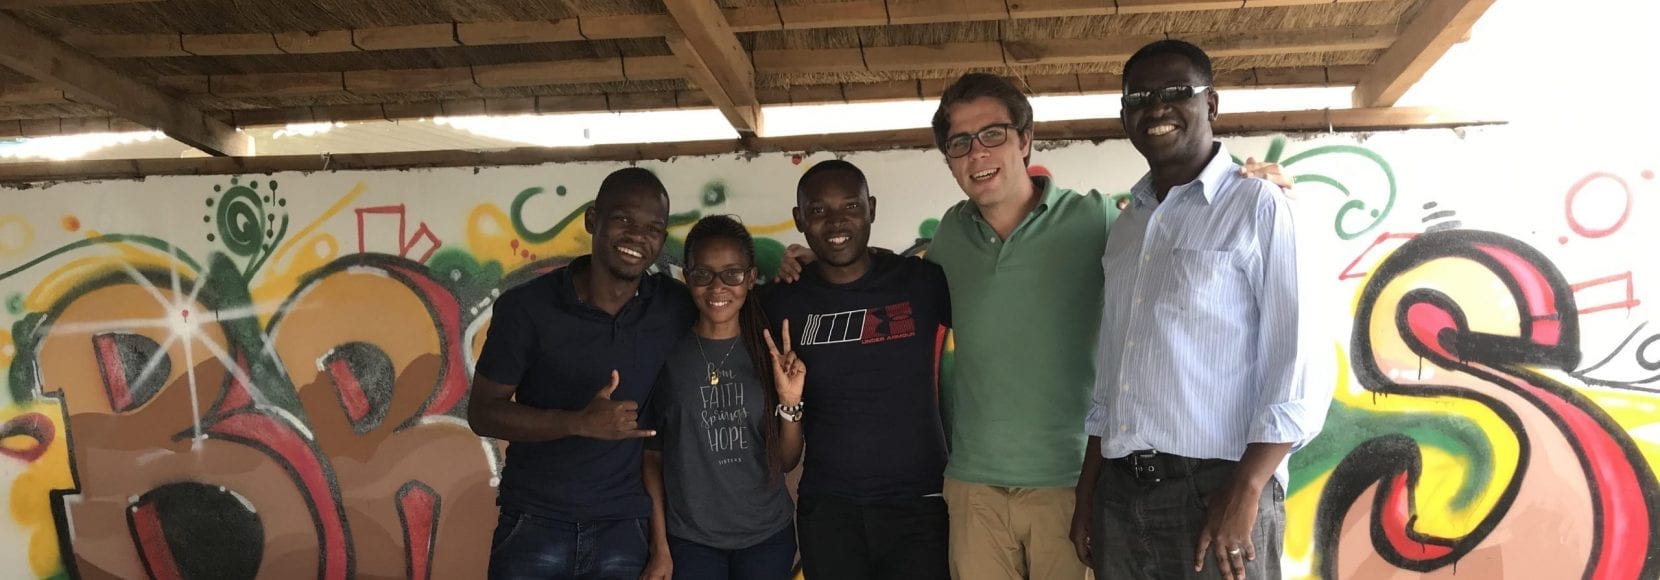 TechnoServe Fellow with team in Zambia working on food security and malnutrition initiatives